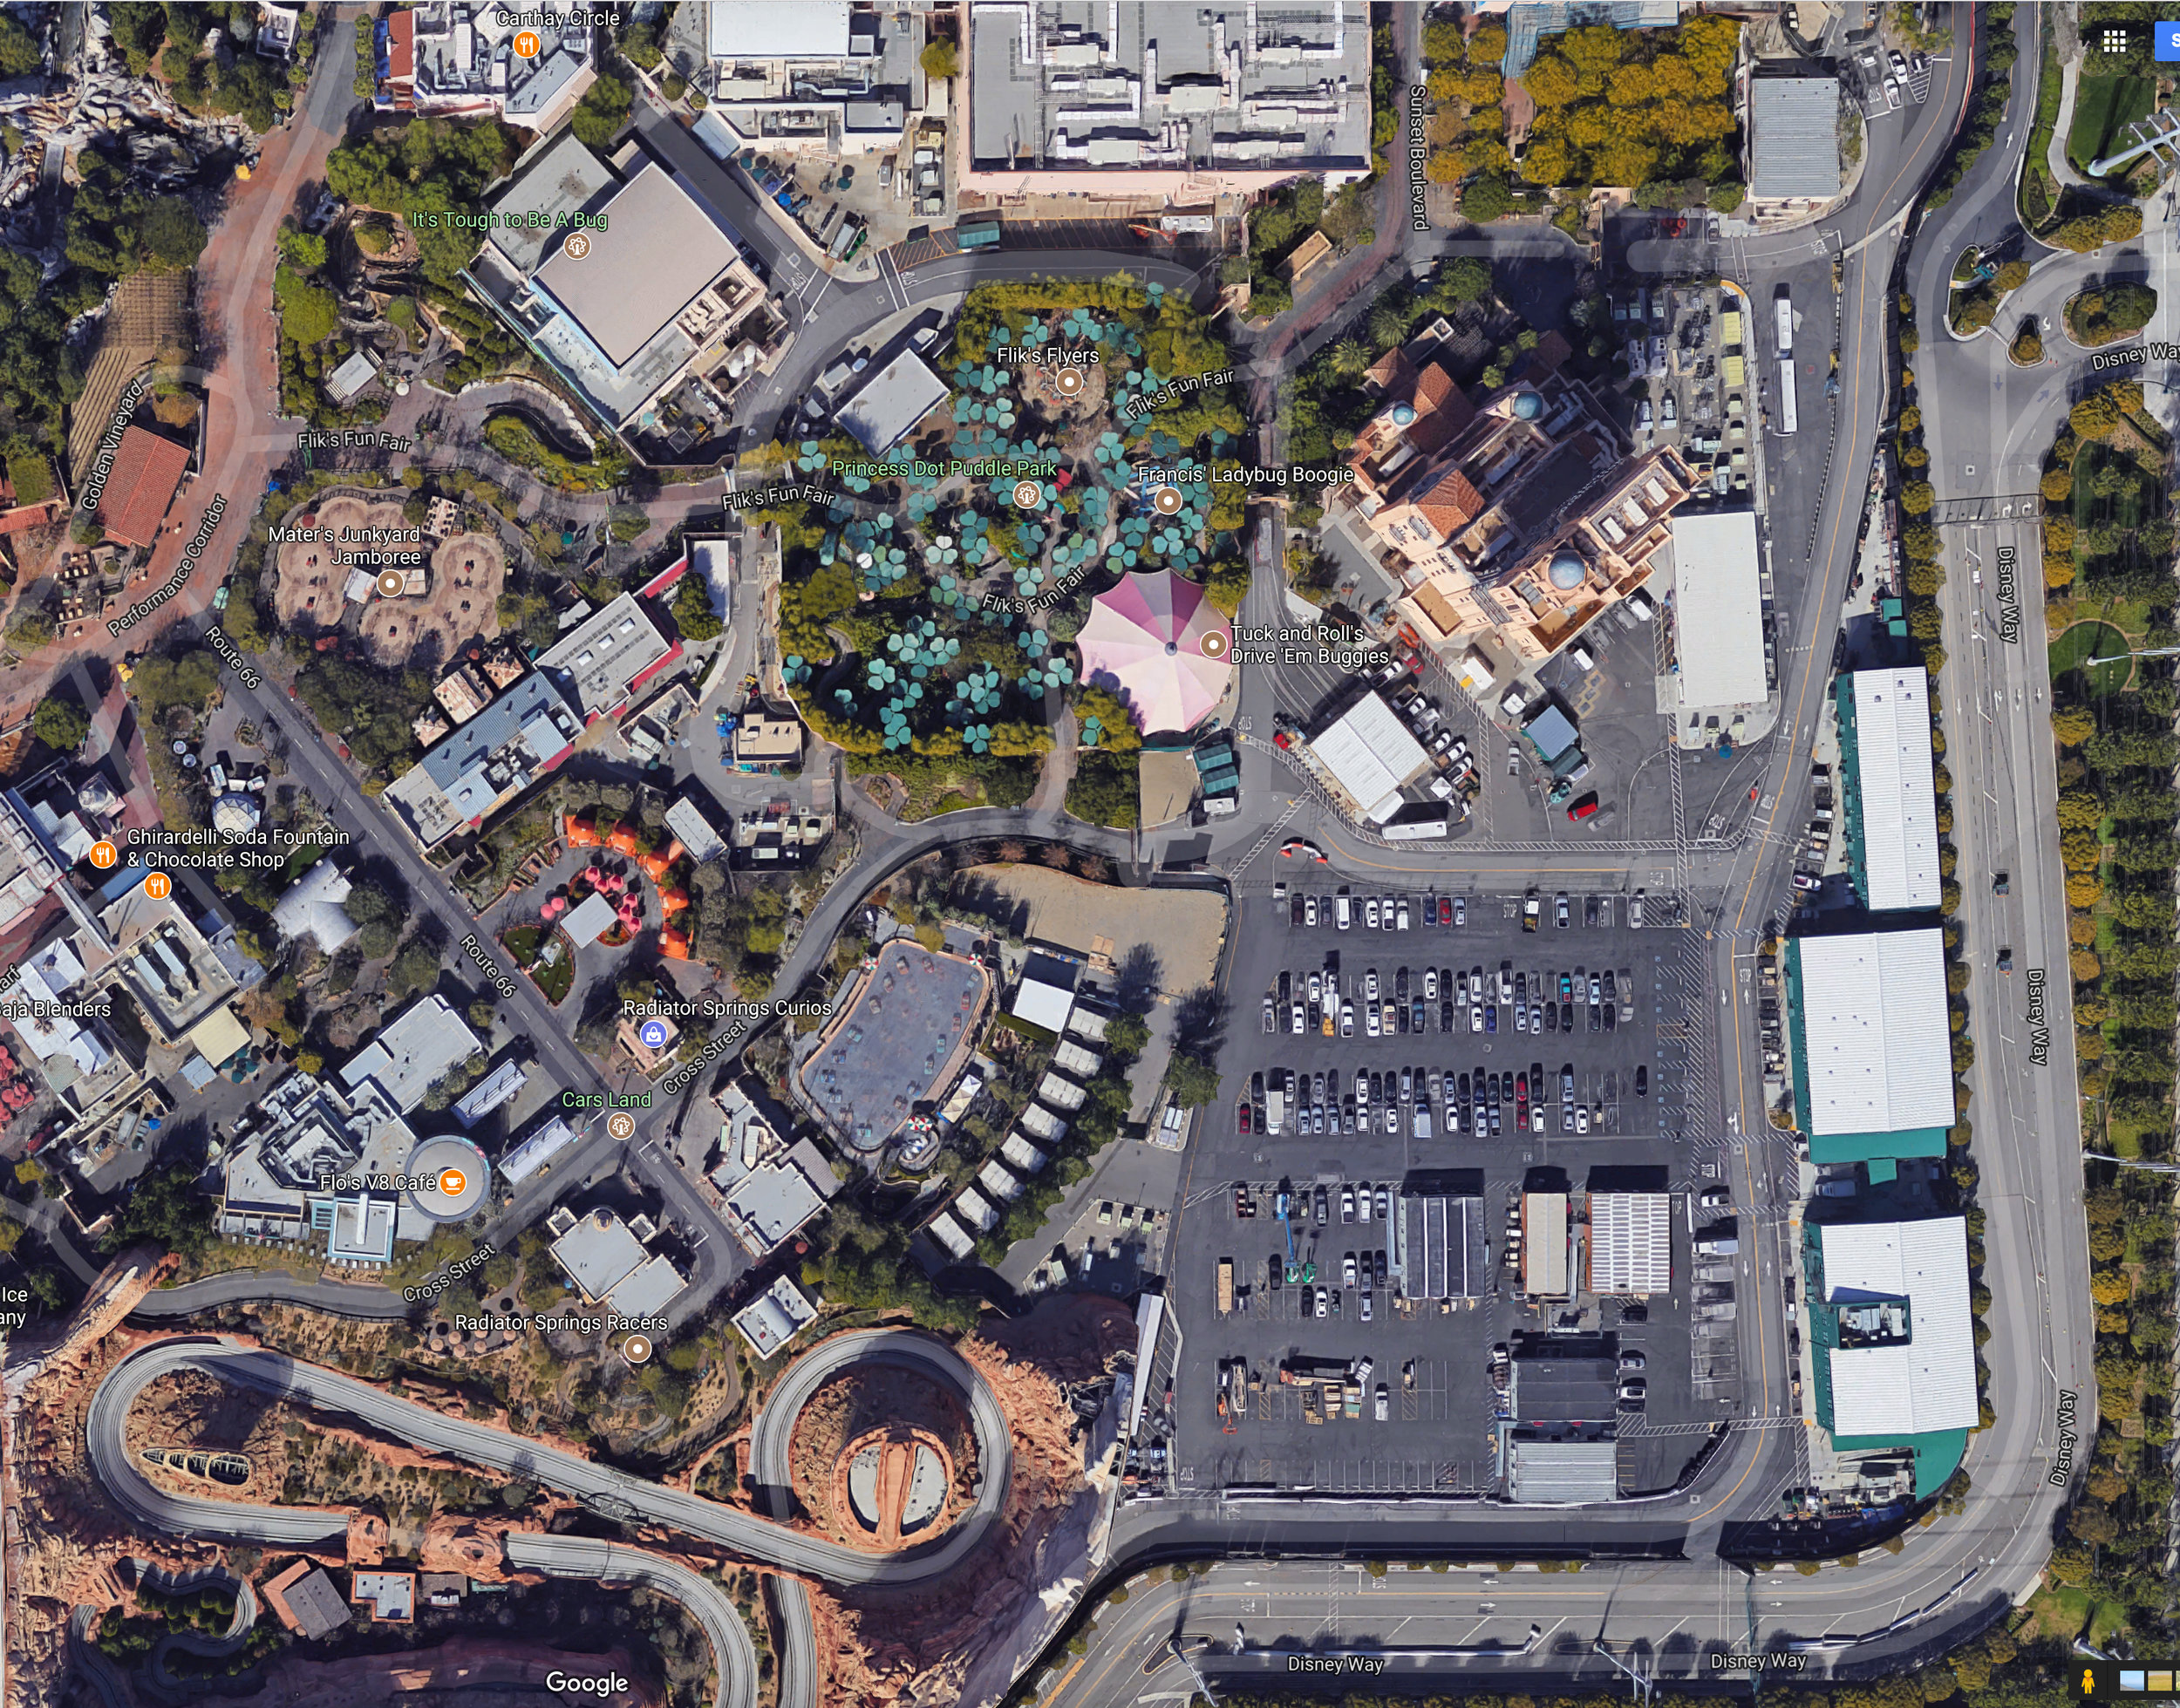  Possible area for future Marvel Land expansion project. 